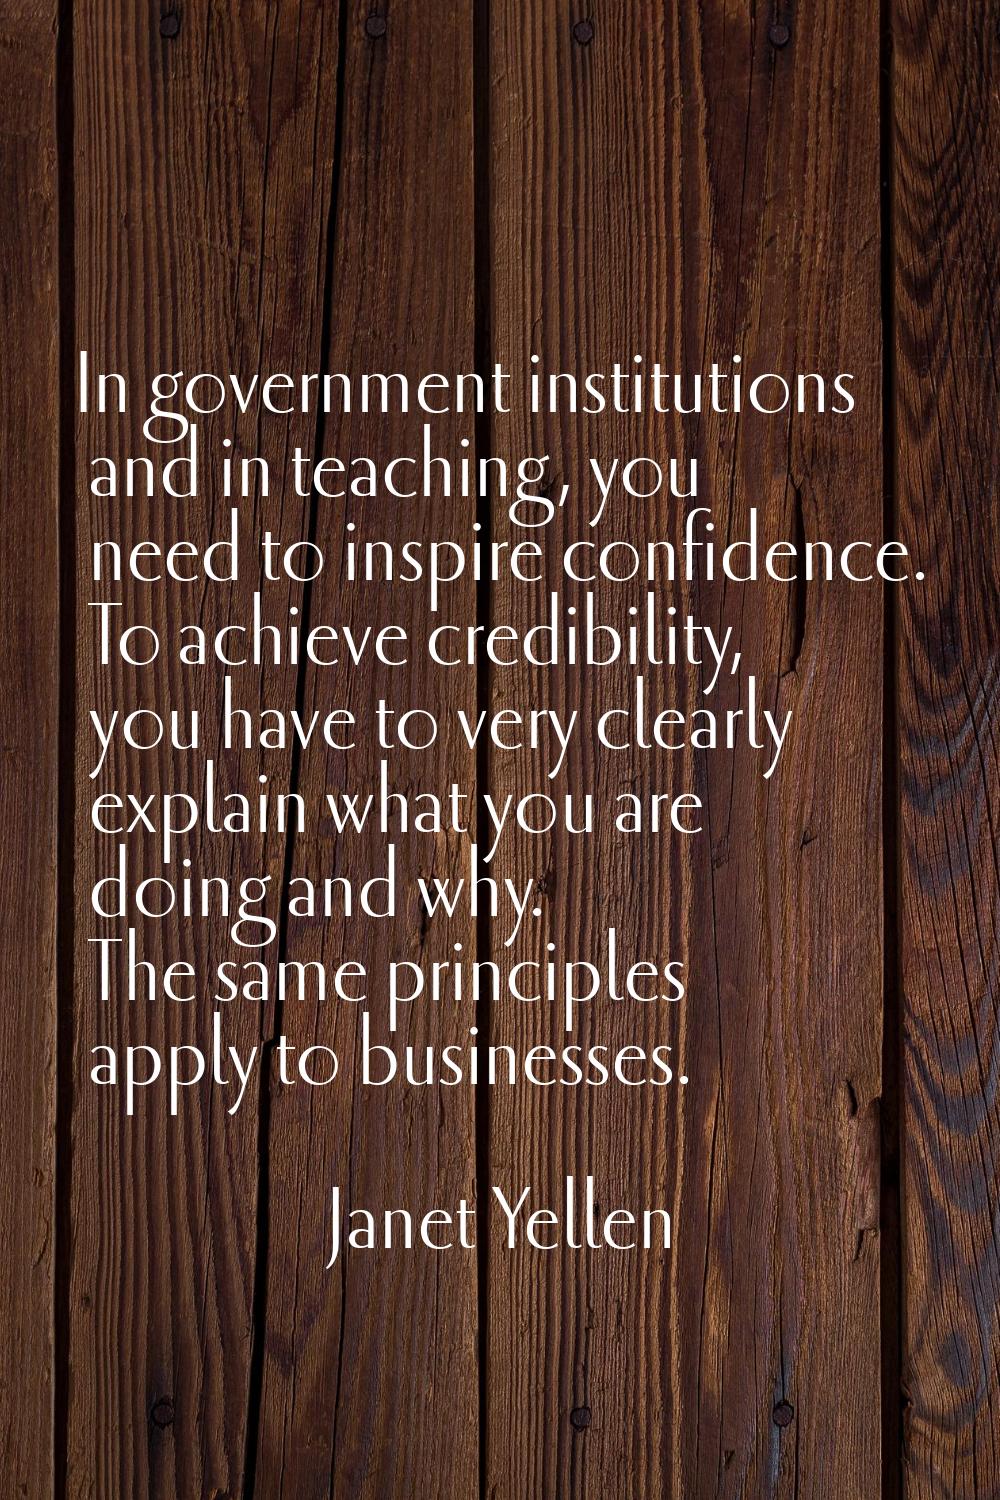 In government institutions and in teaching, you need to inspire confidence. To achieve credibility,